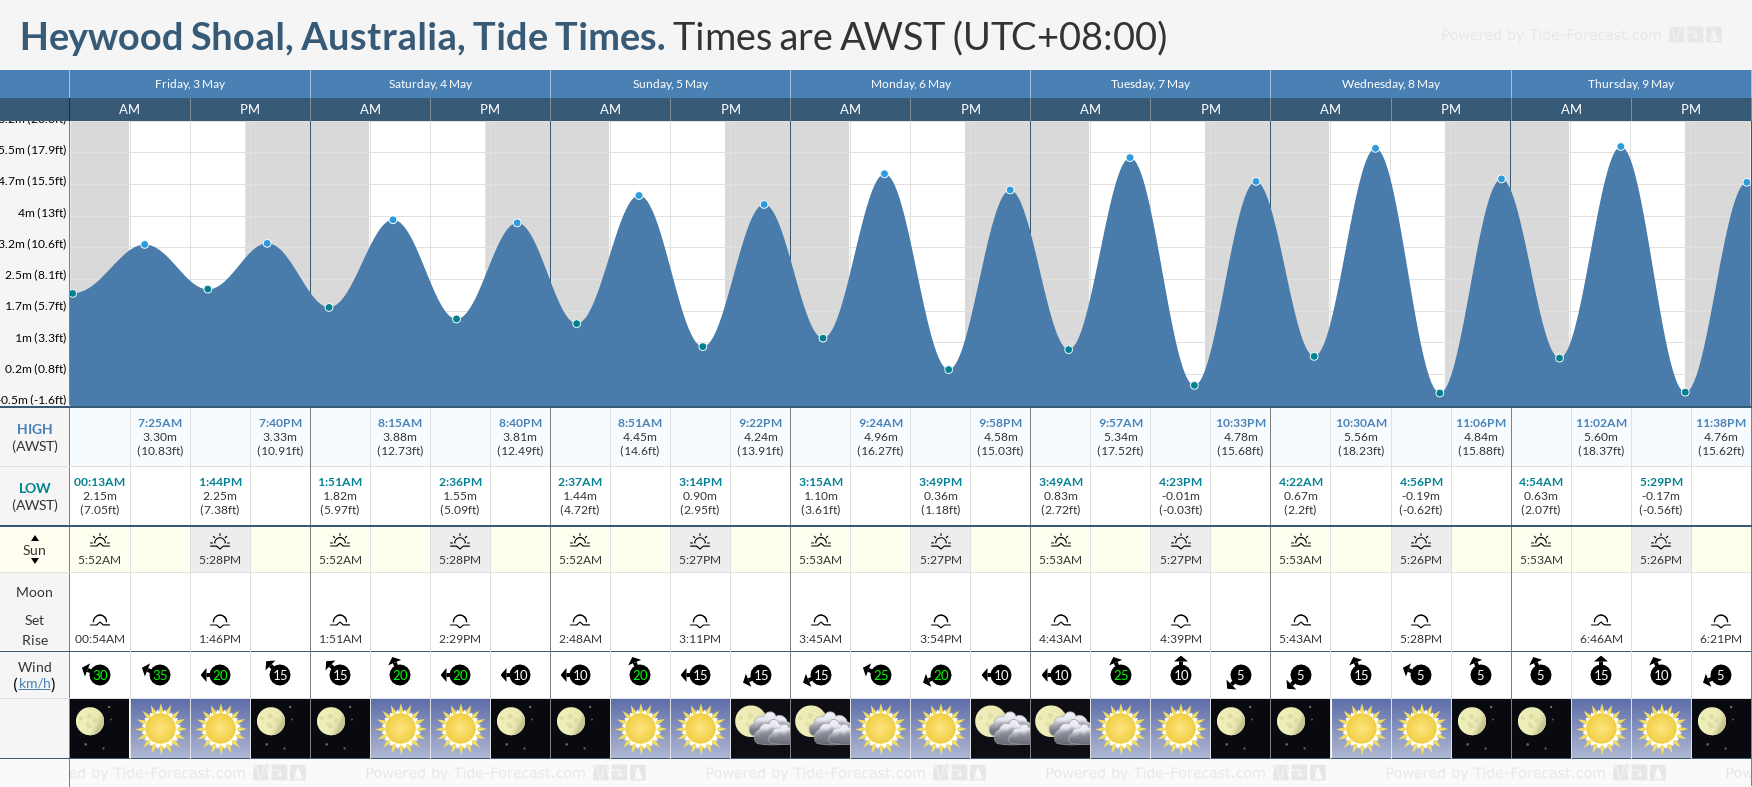 Heywood Shoal, Australia Tide Chart including high and low tide tide times for the next 7 days